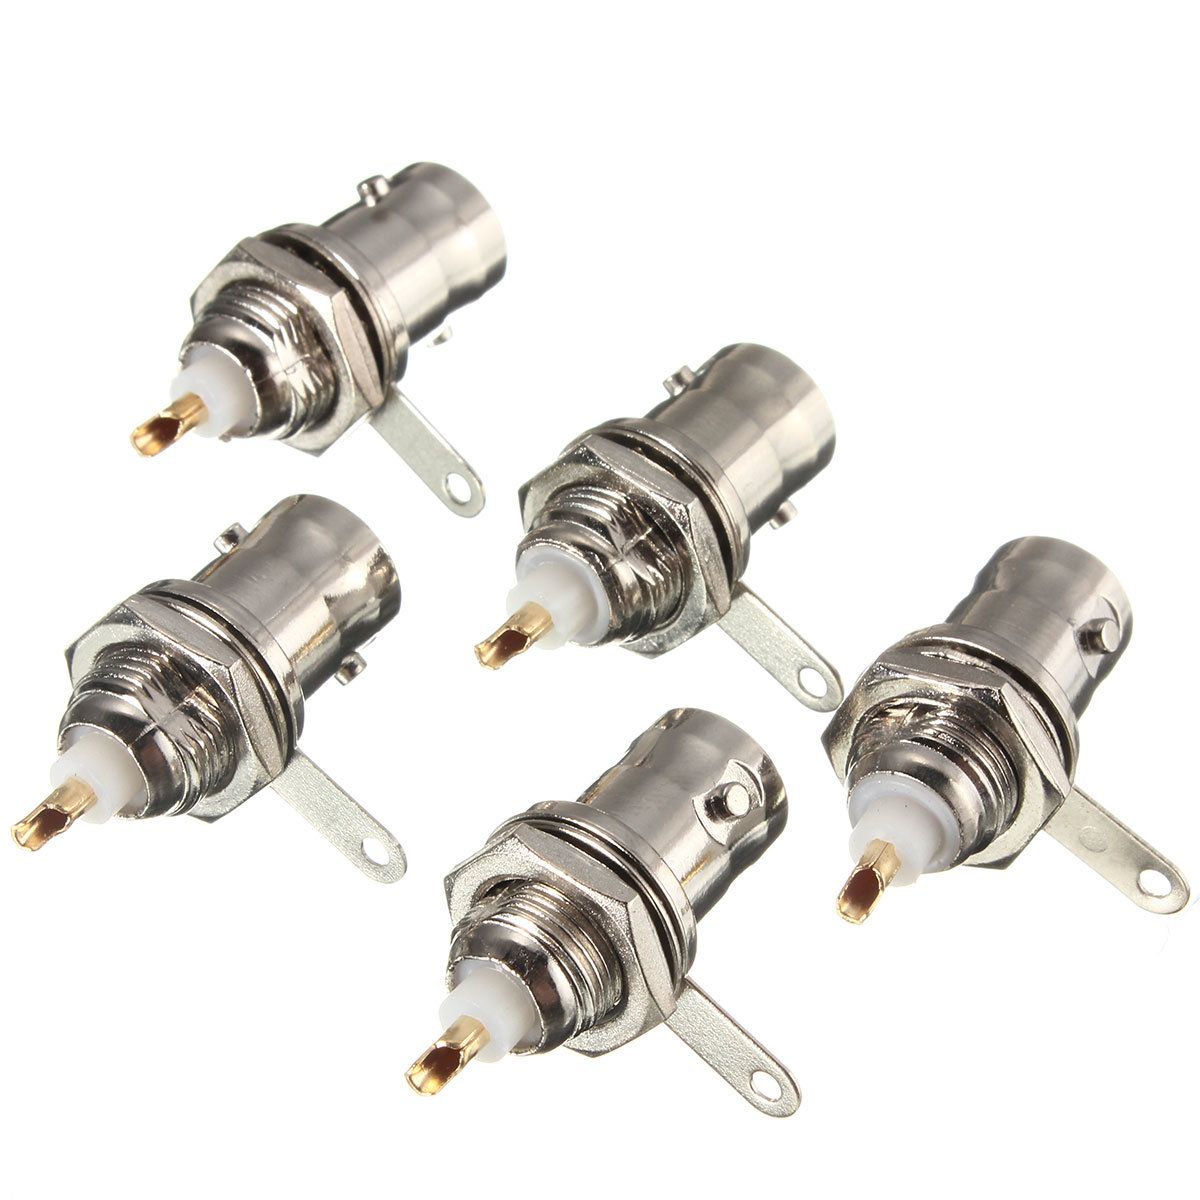 5pcs-BNC-Female-Socket-Solder-Connector-for-Chassis-Panel-Mount-Coaxial-Cable-1052398